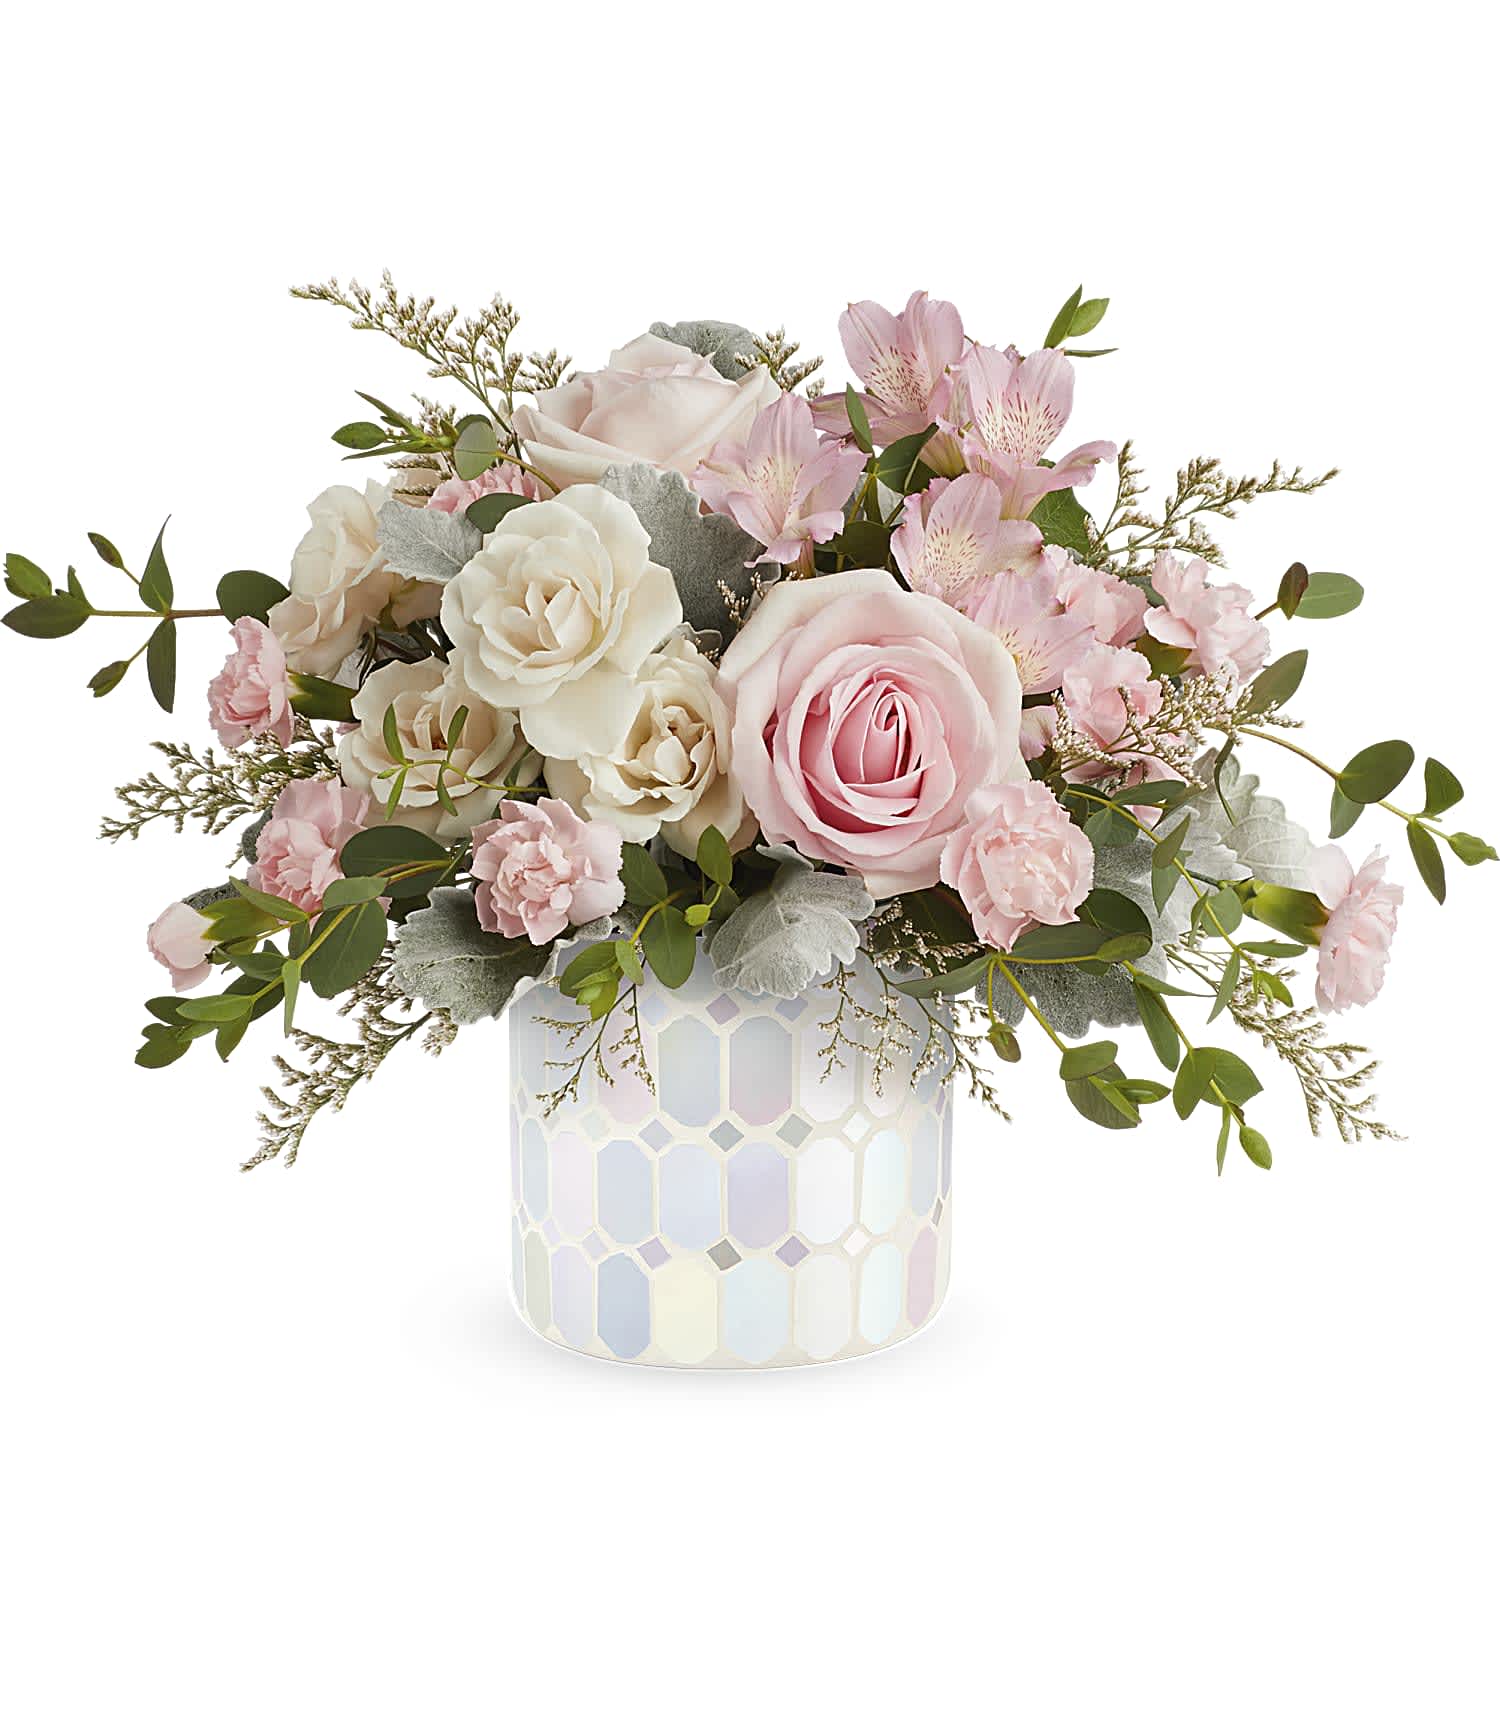 Rosie Skies - Illuminate love with Teleflora's Alluring Mosaic cylinder, embracing soft pastel shimmer and cradling an exquisite bouquet of vibrant pink flowers, a timeless expression of artistic beauty for any occasion.